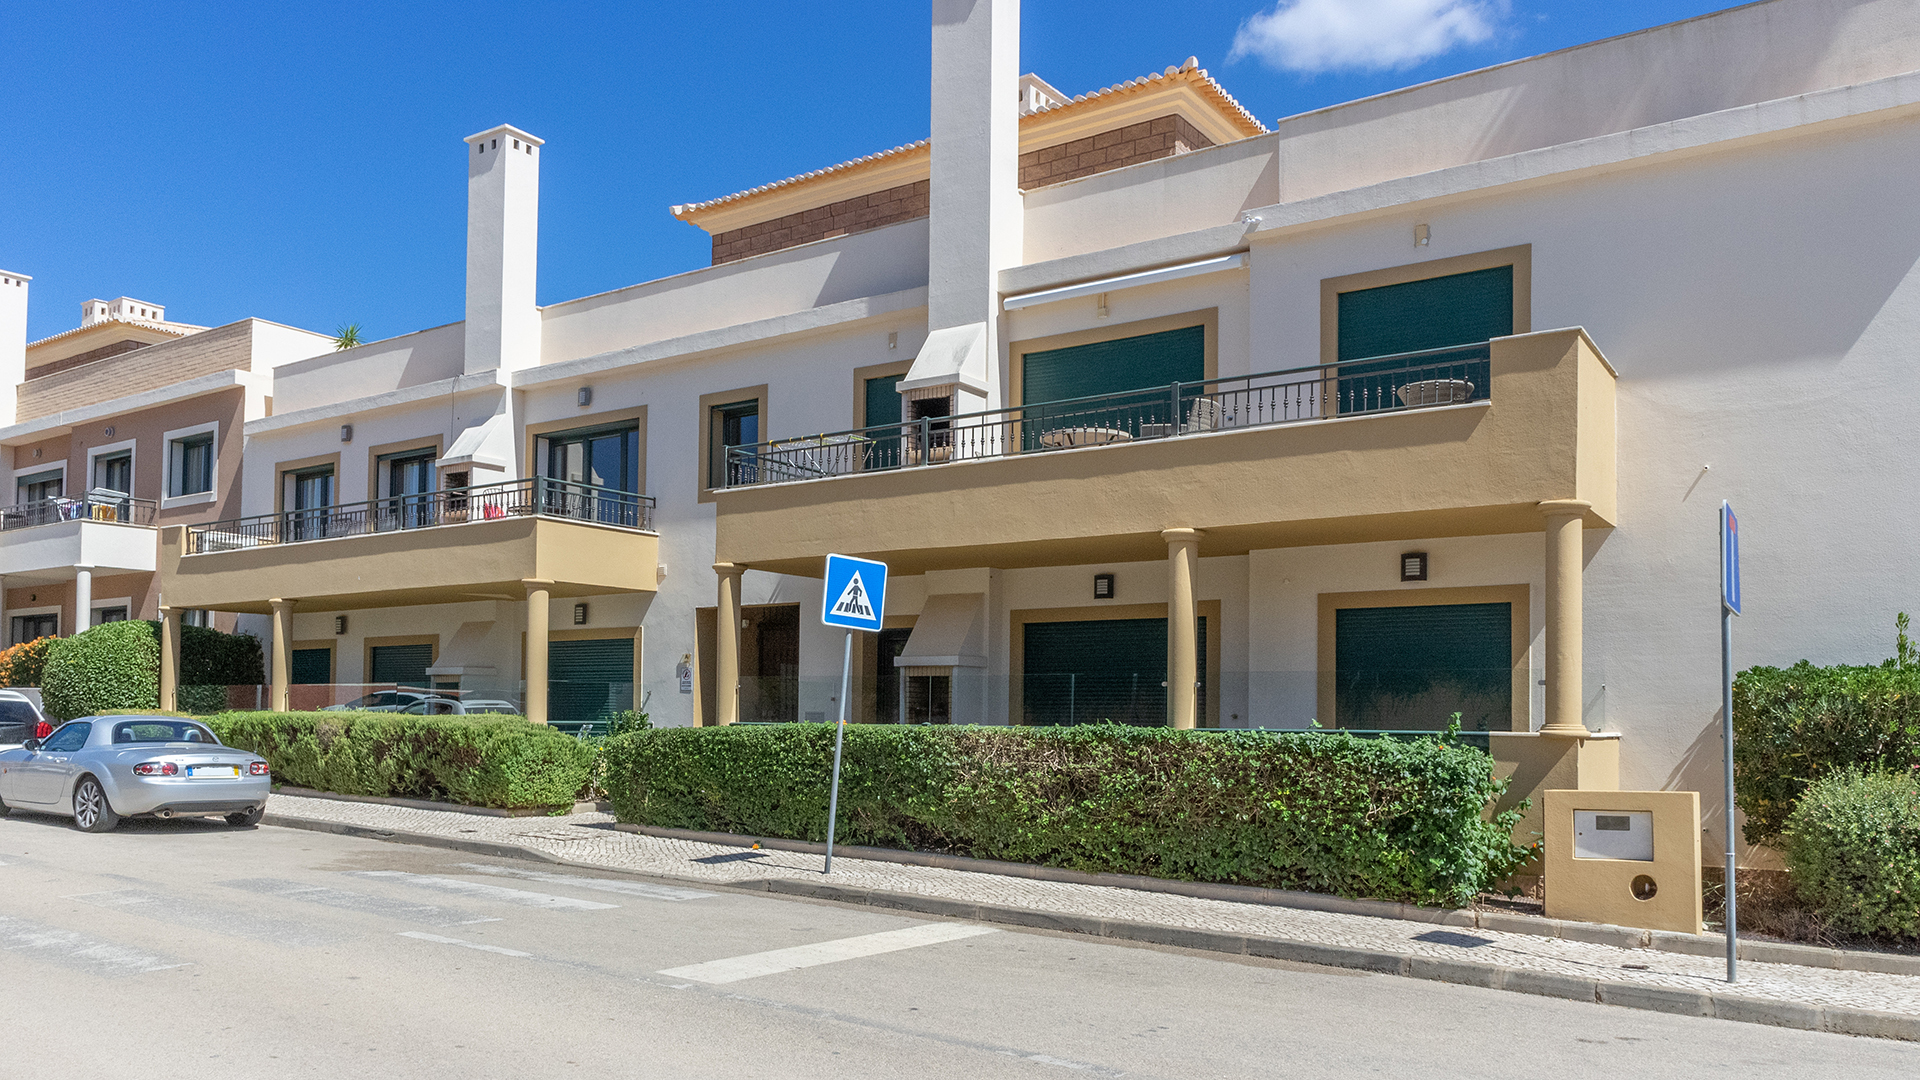 2 bedroom apartment just 450 m from the beach in Burgau | LG2172 The apartment is in a prime location, within walking distance to the beach and all amenities in the beautiful fishing village of Burgau in the West Algarve.